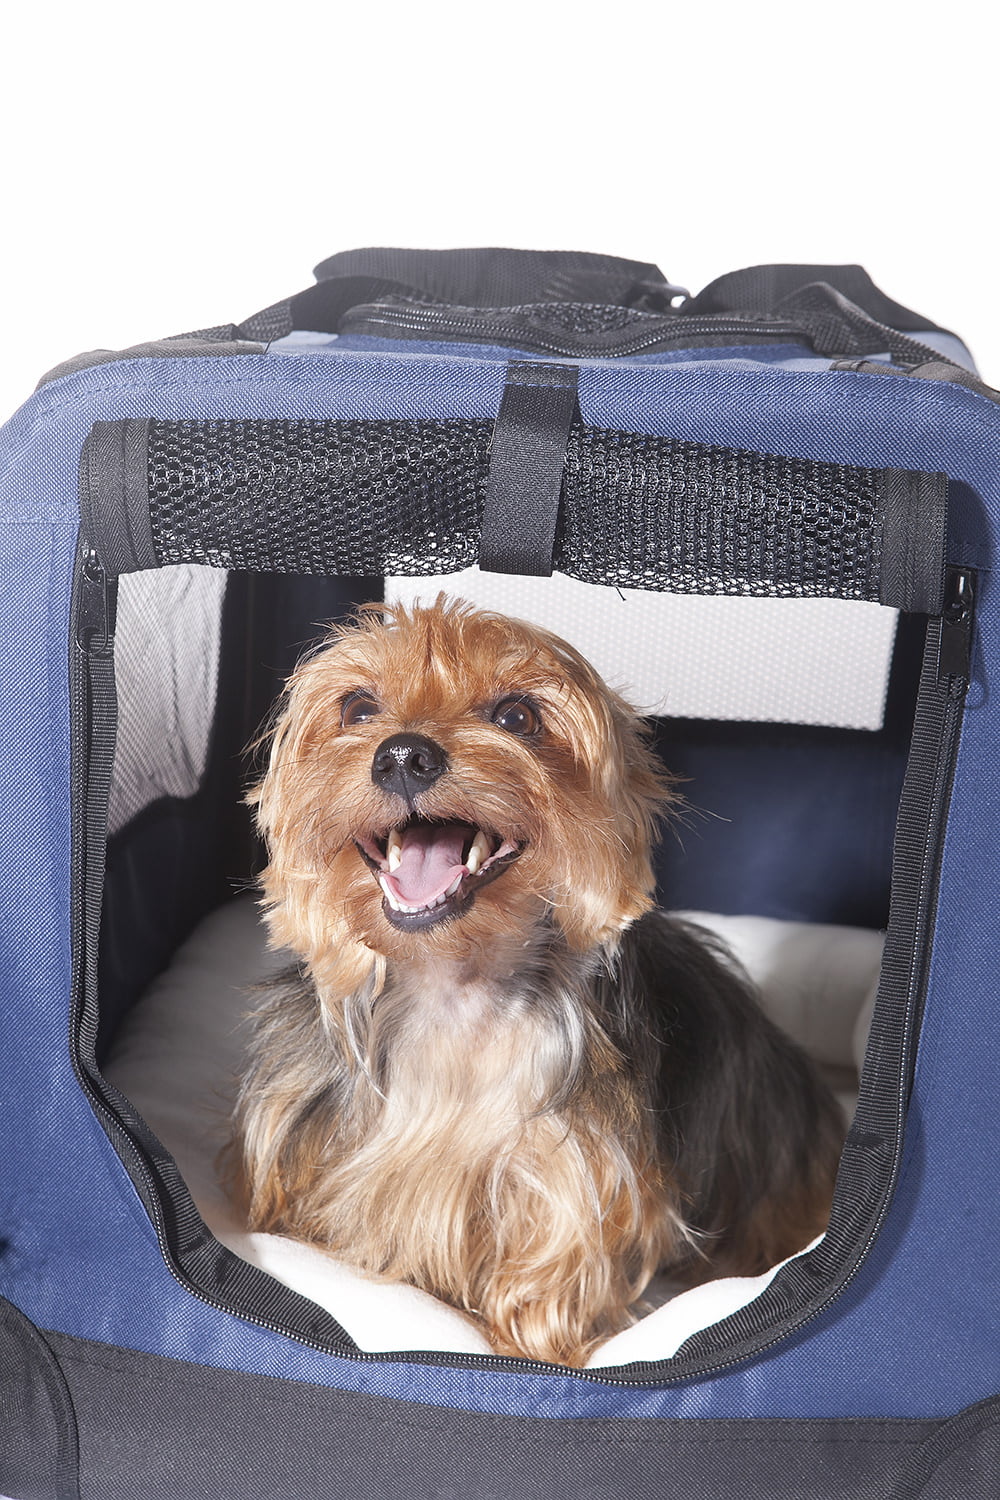 Comfy Dog Home & Dog Travel Crate Large Strong Steel Frame Grizzle Grey Washable Fabric Cover 2PET Foldable Dog Crate Easy to Fold & Carry Dog Crate for Indoor & Outdoor Use Soft 